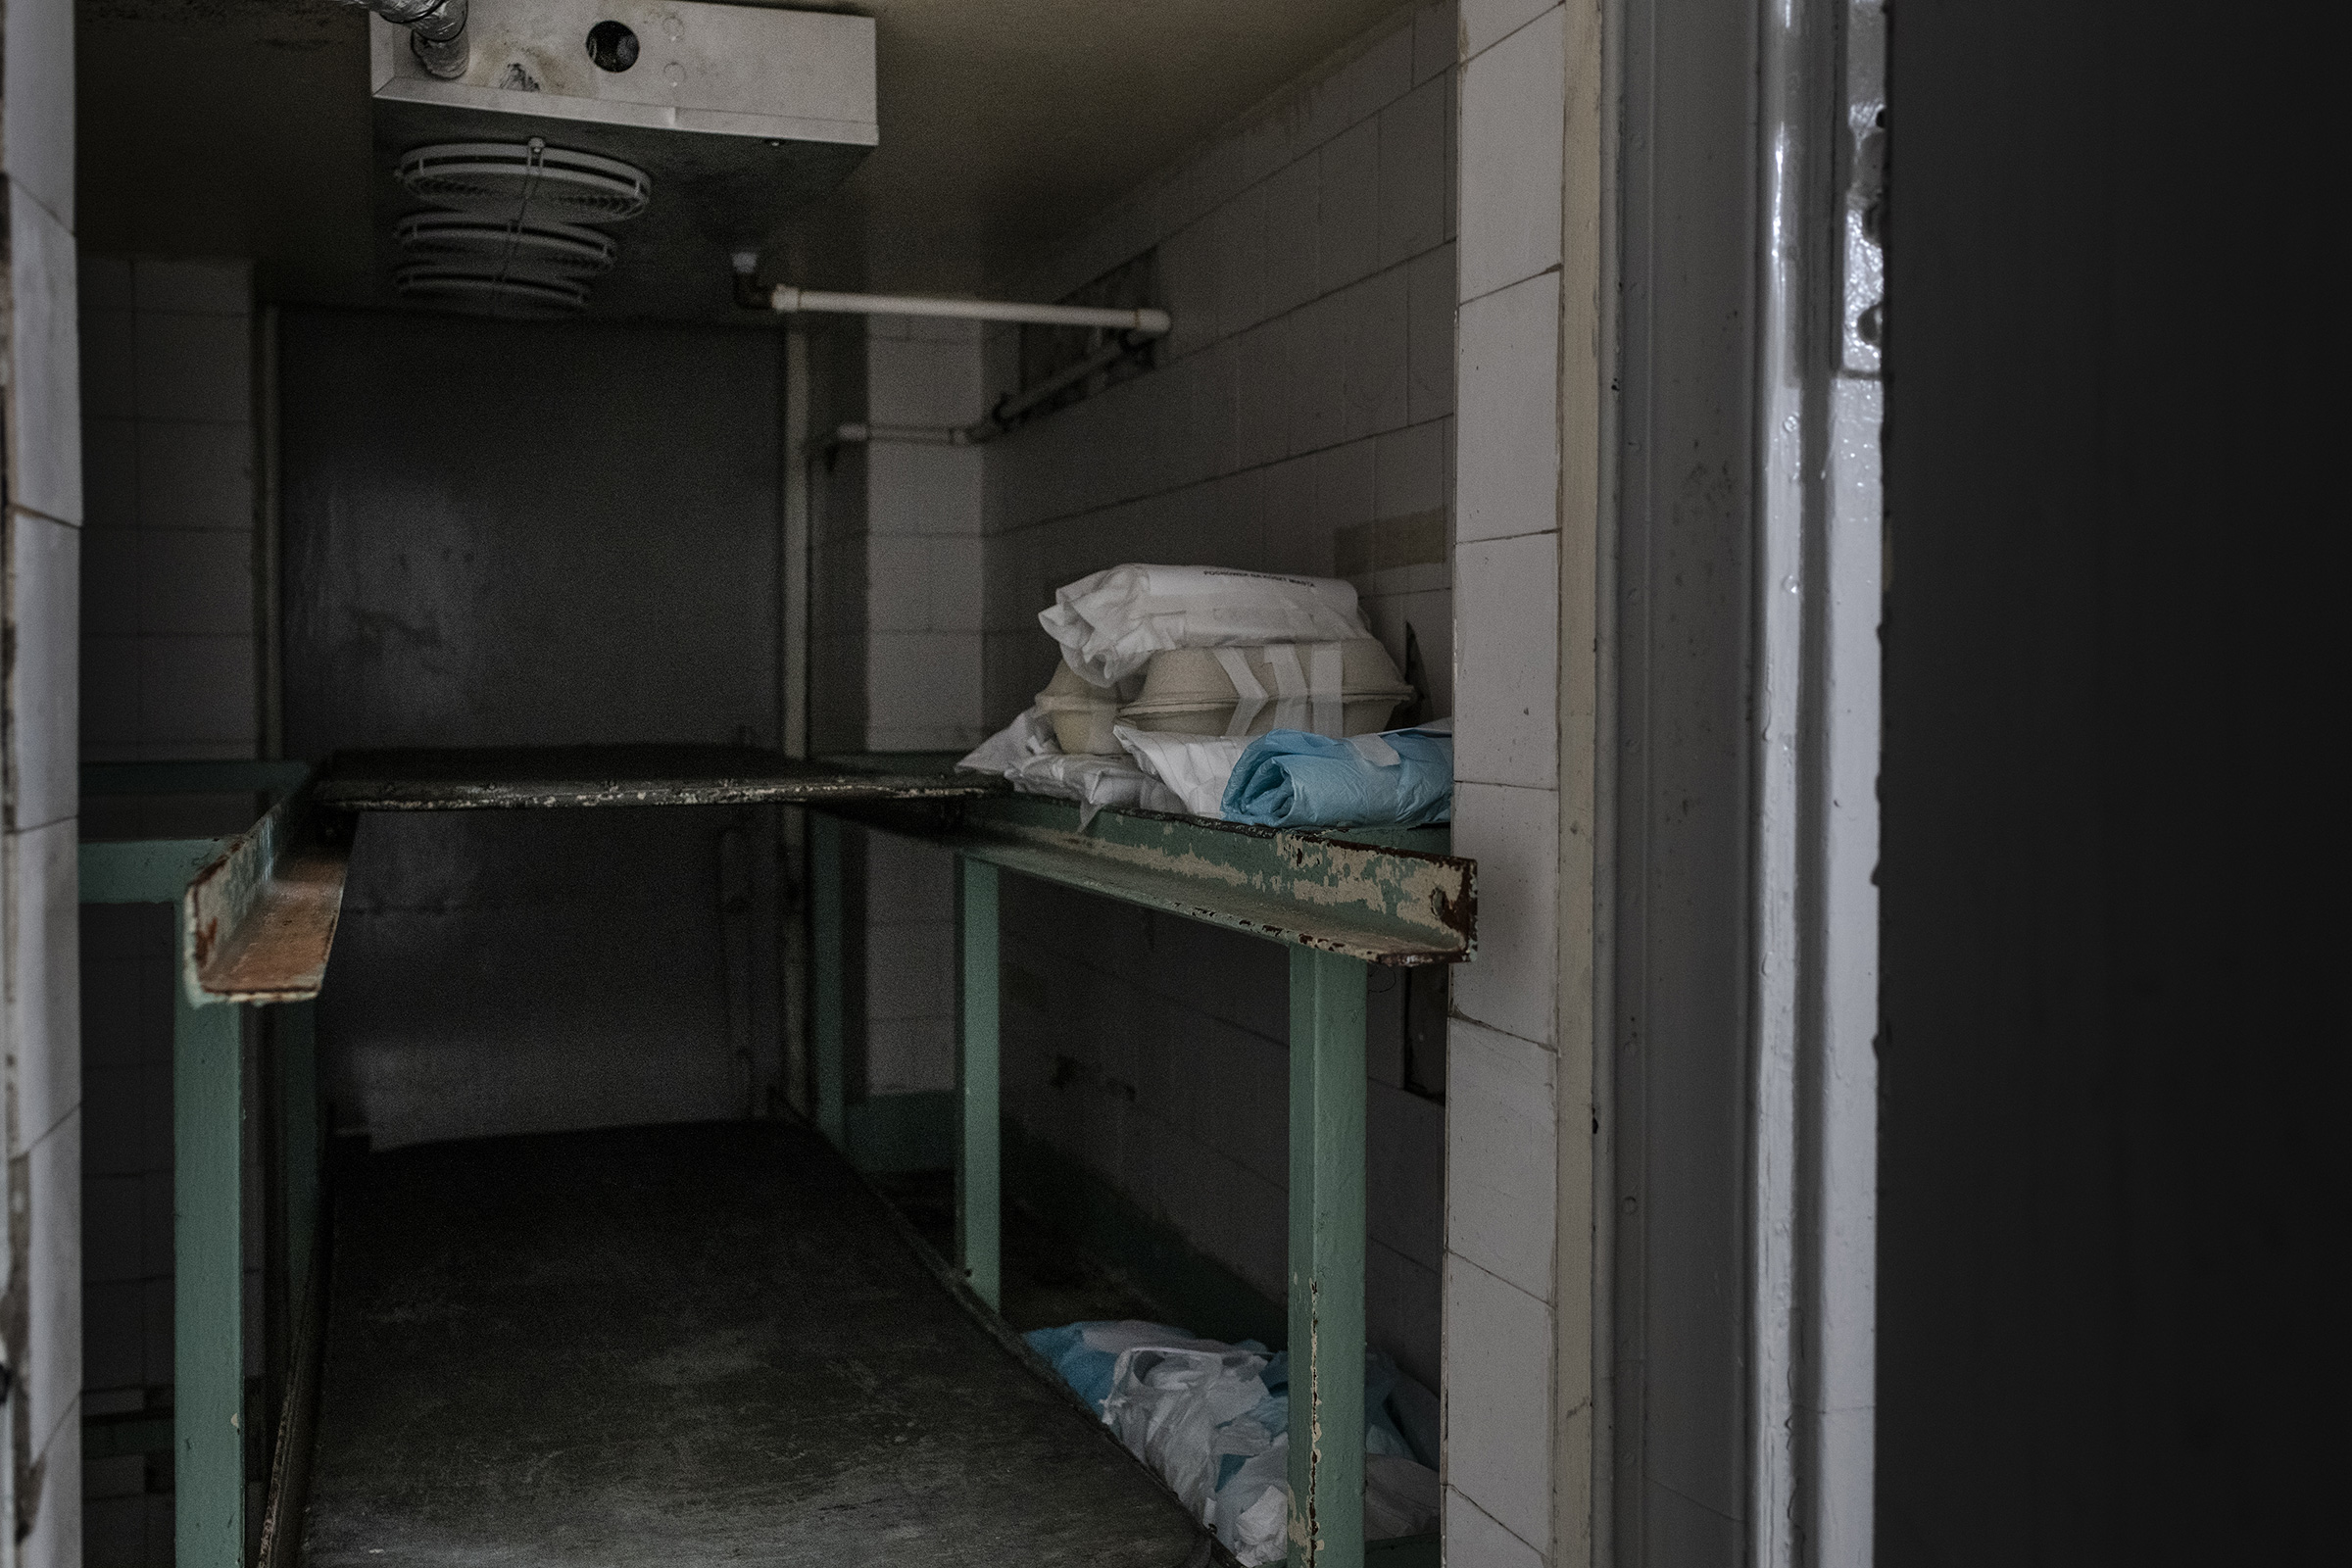 About 20 fetuses wrapped in cloth and paper in a fridge at a hospital morgue. The fetuses, many of which were born prematurely or with severe malformations, were abandoned.